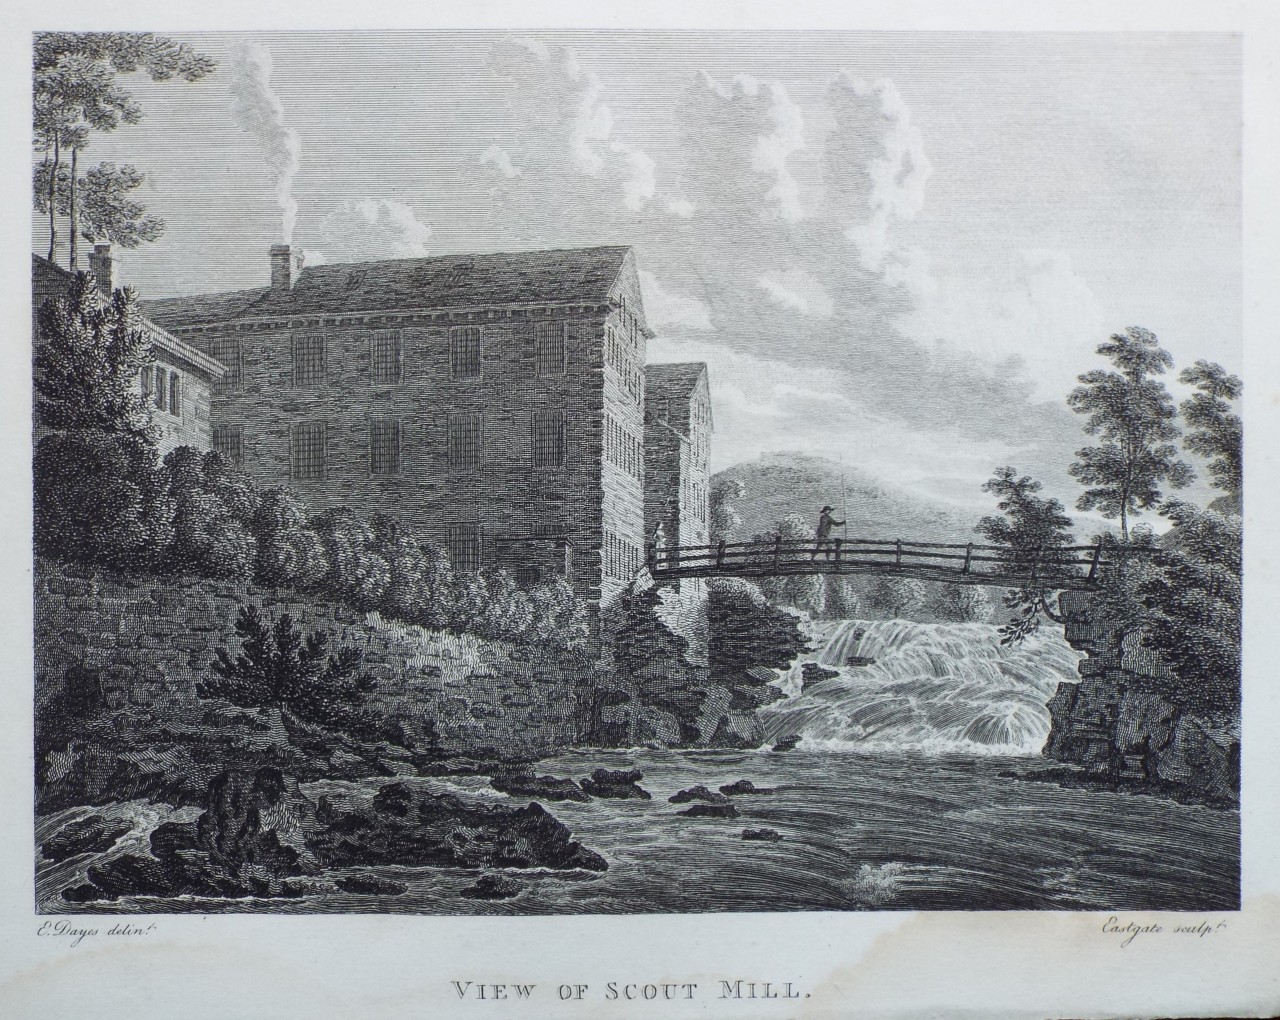 Print - View of Scout Mill. - 